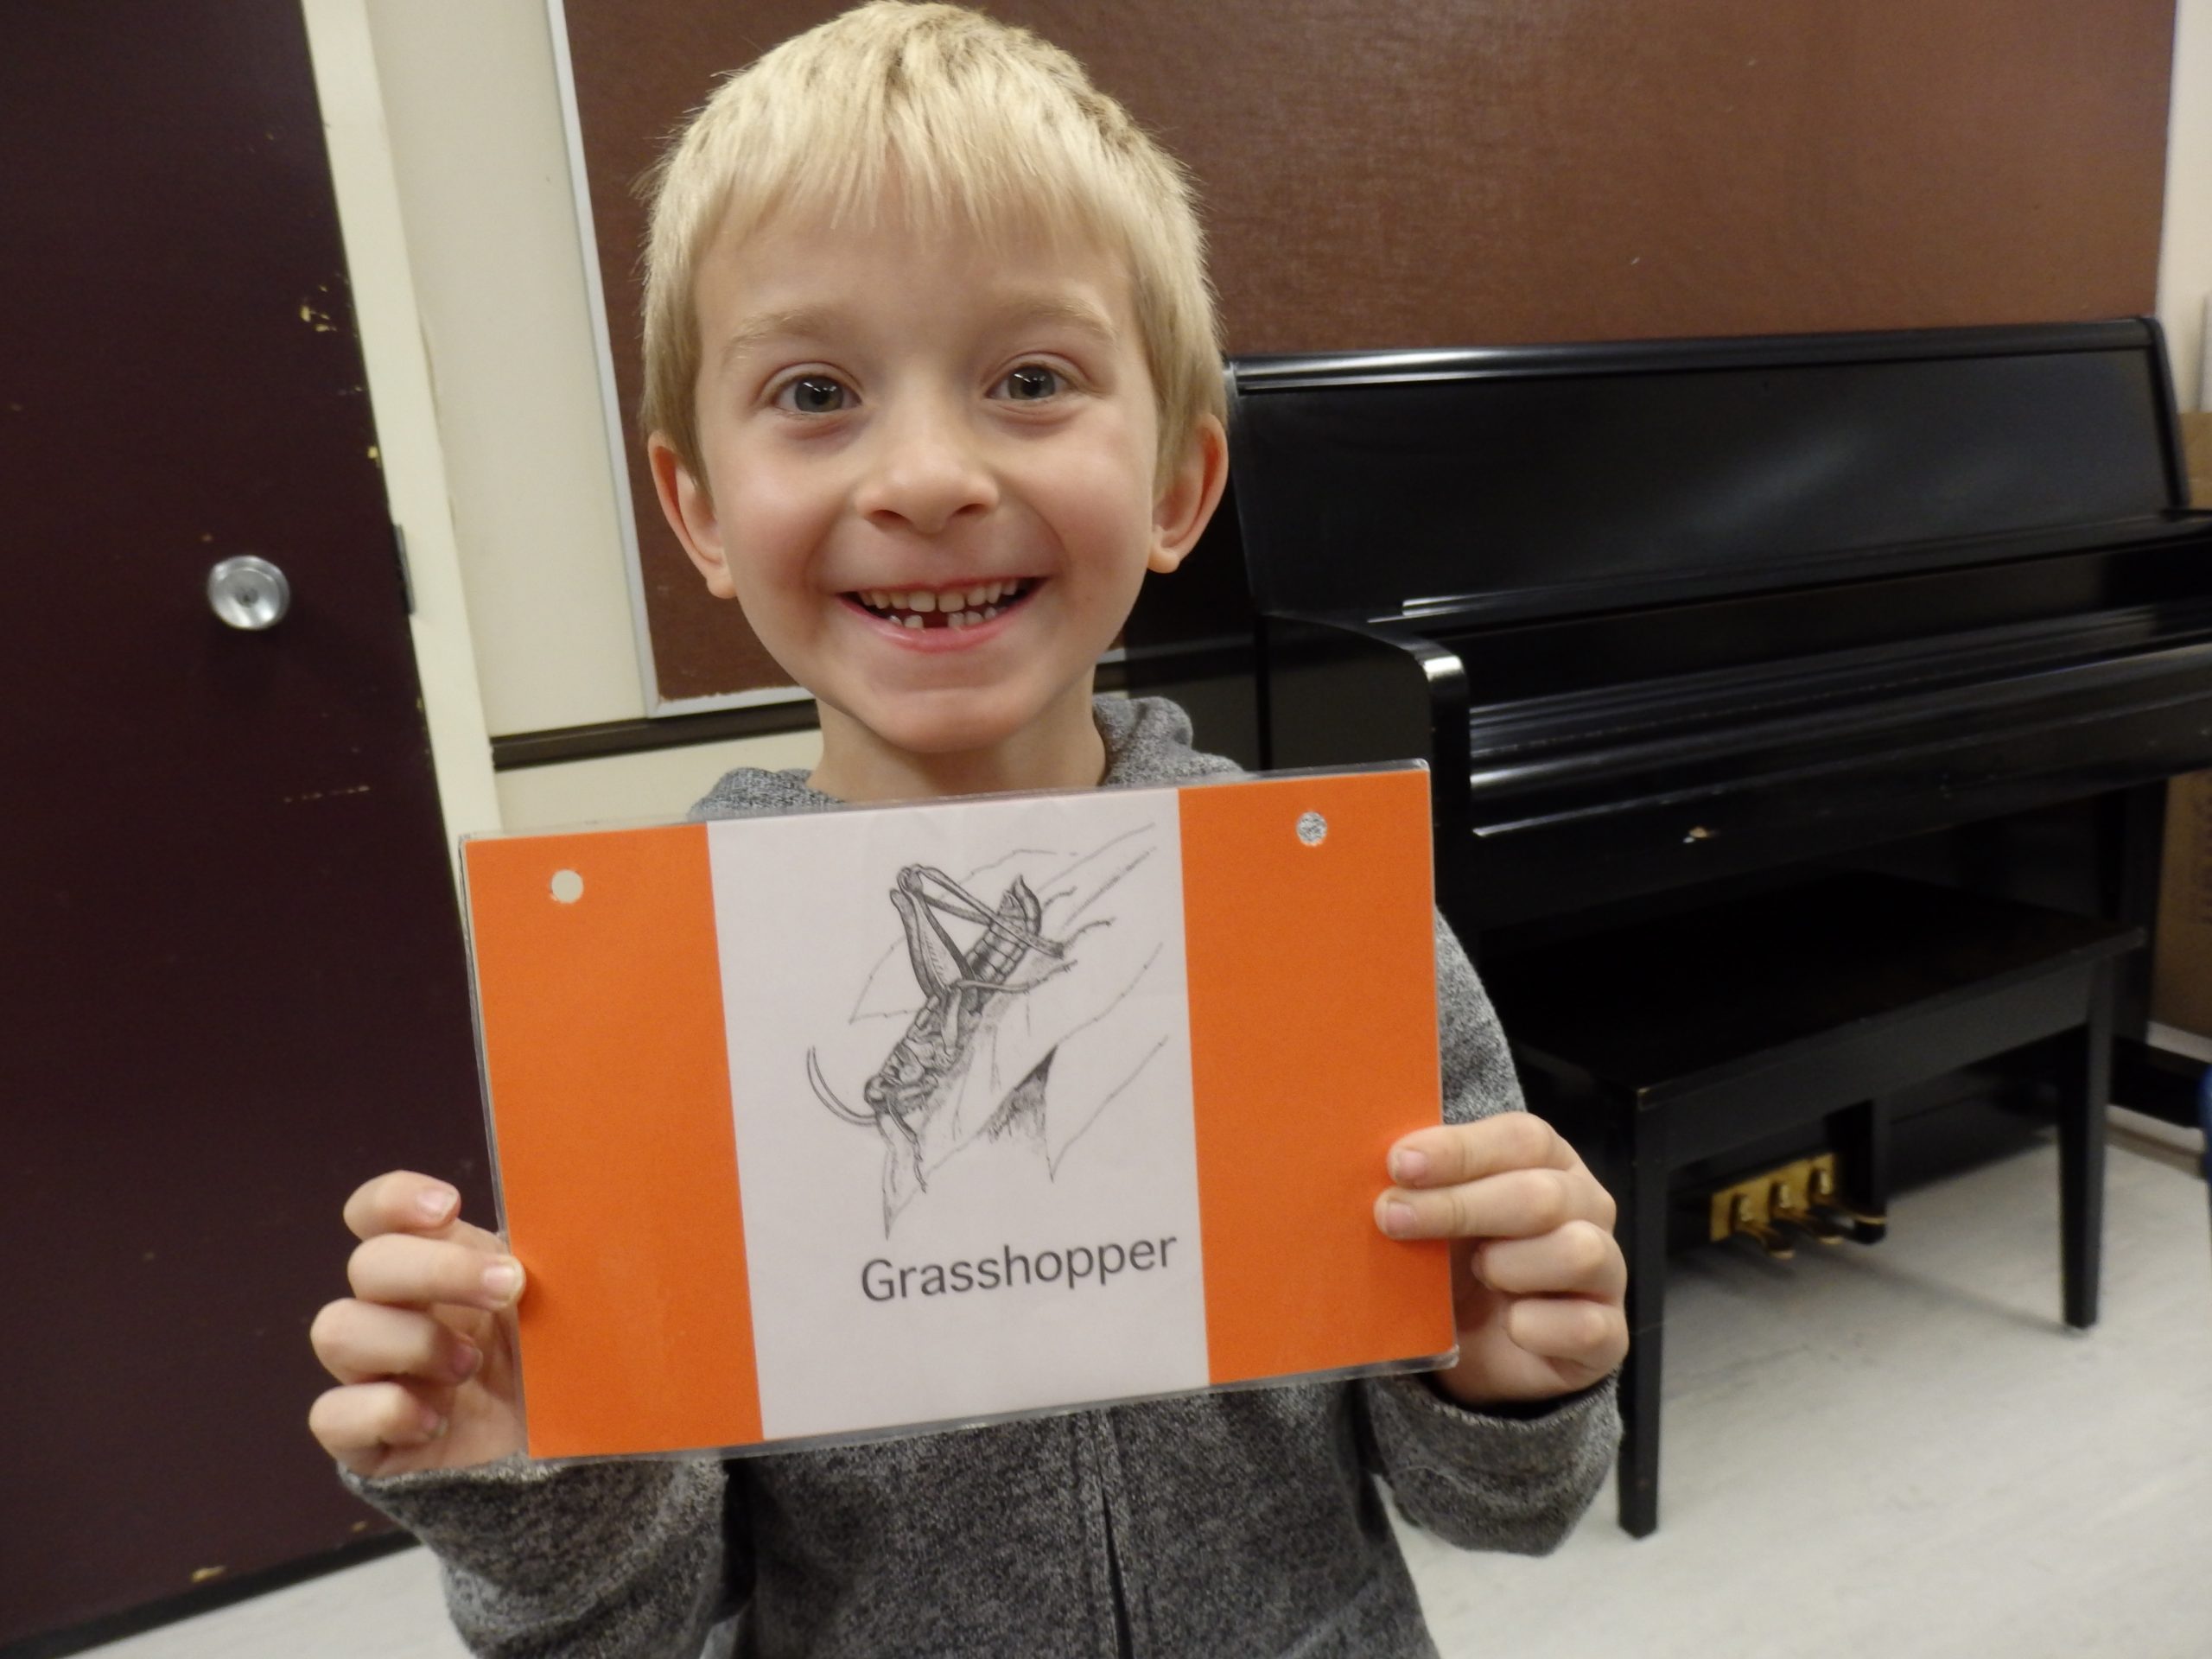 Student holding grasshopper sign for who am I activity